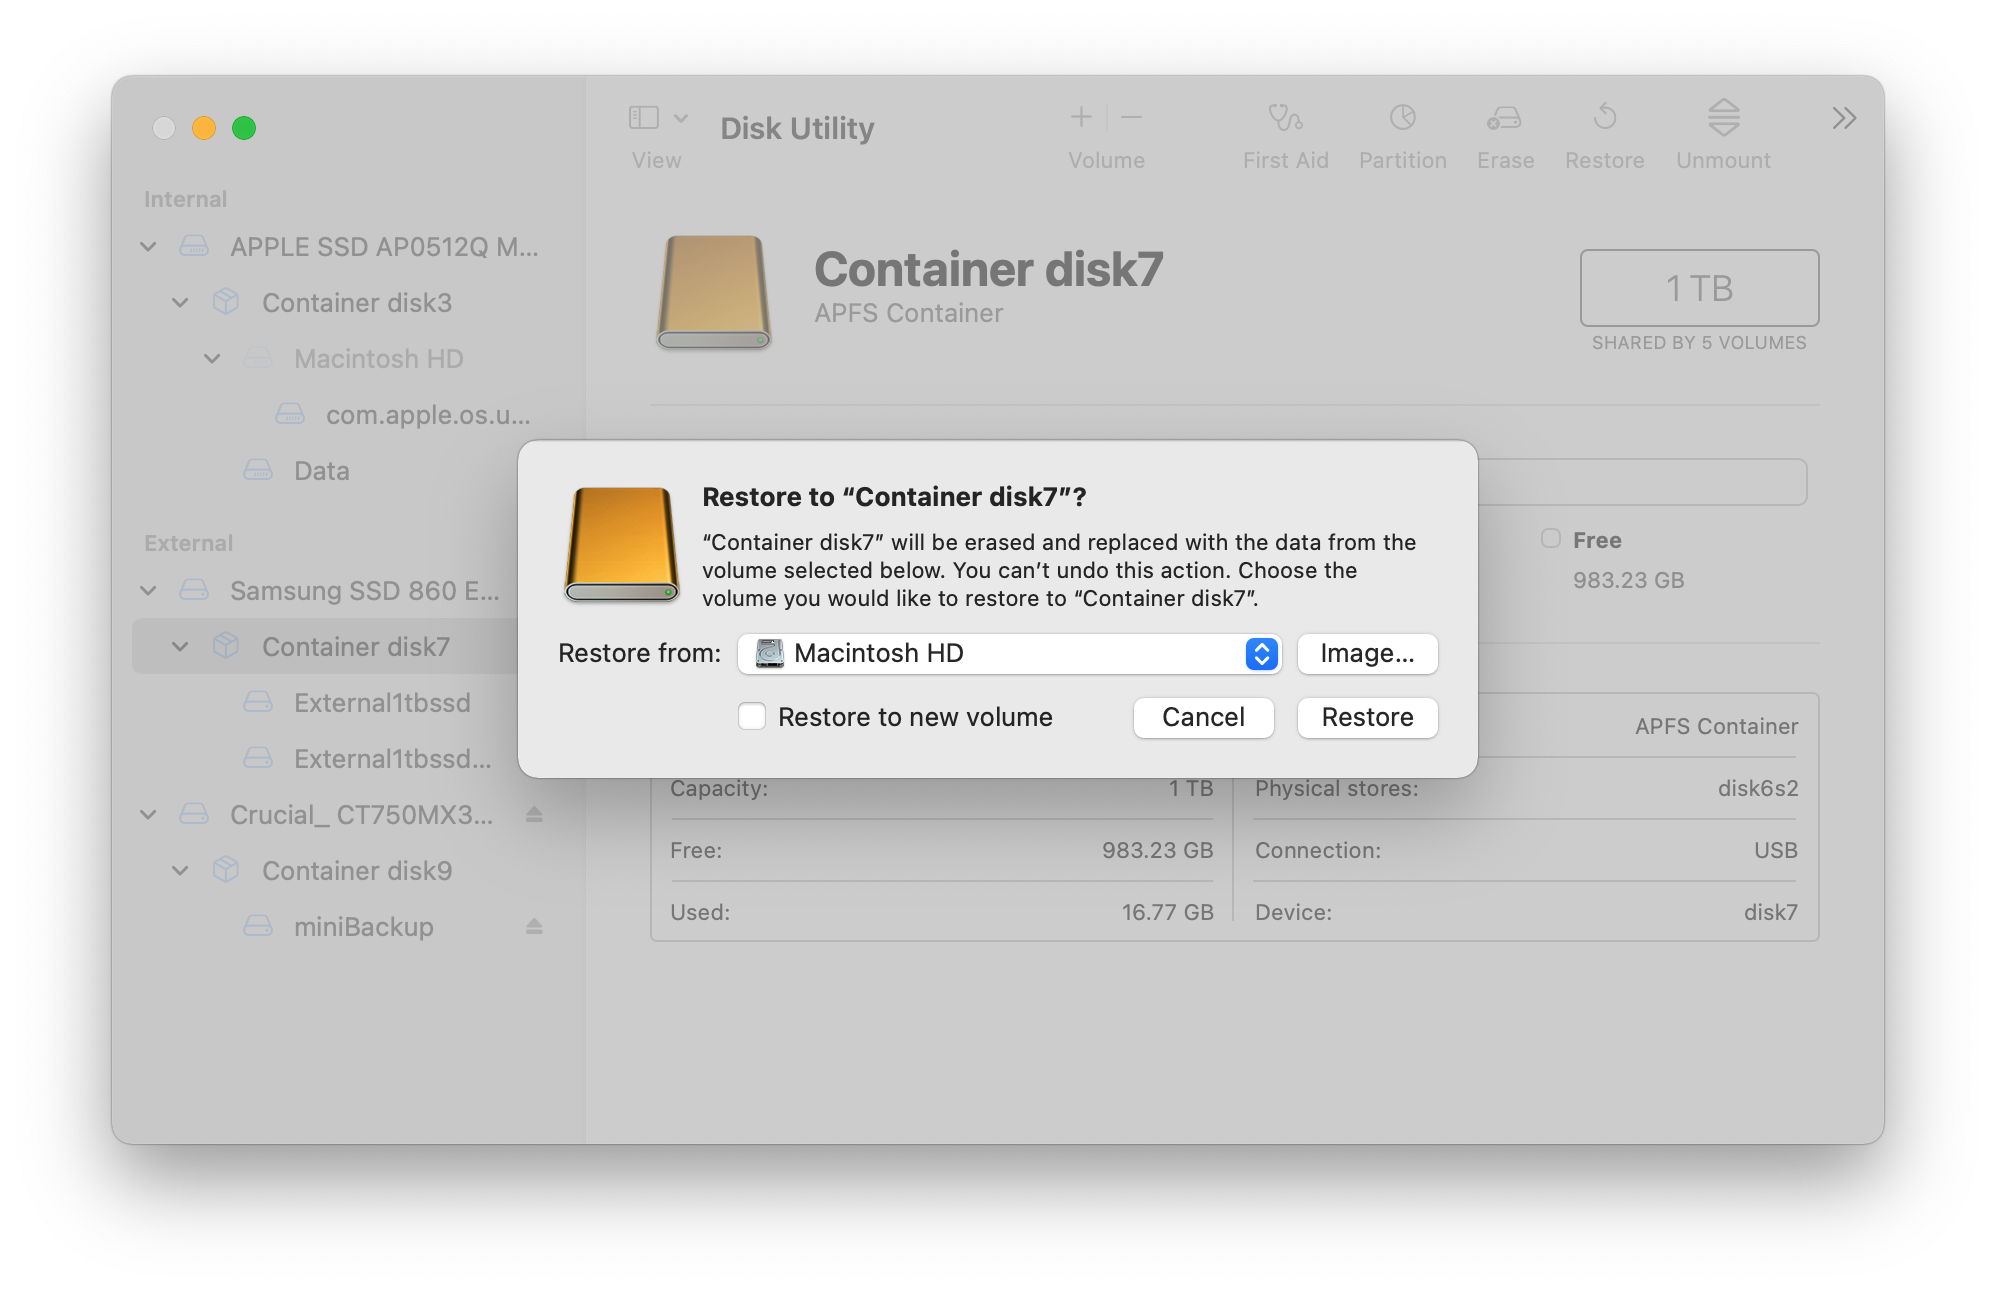 disk restore for mac without disk utility